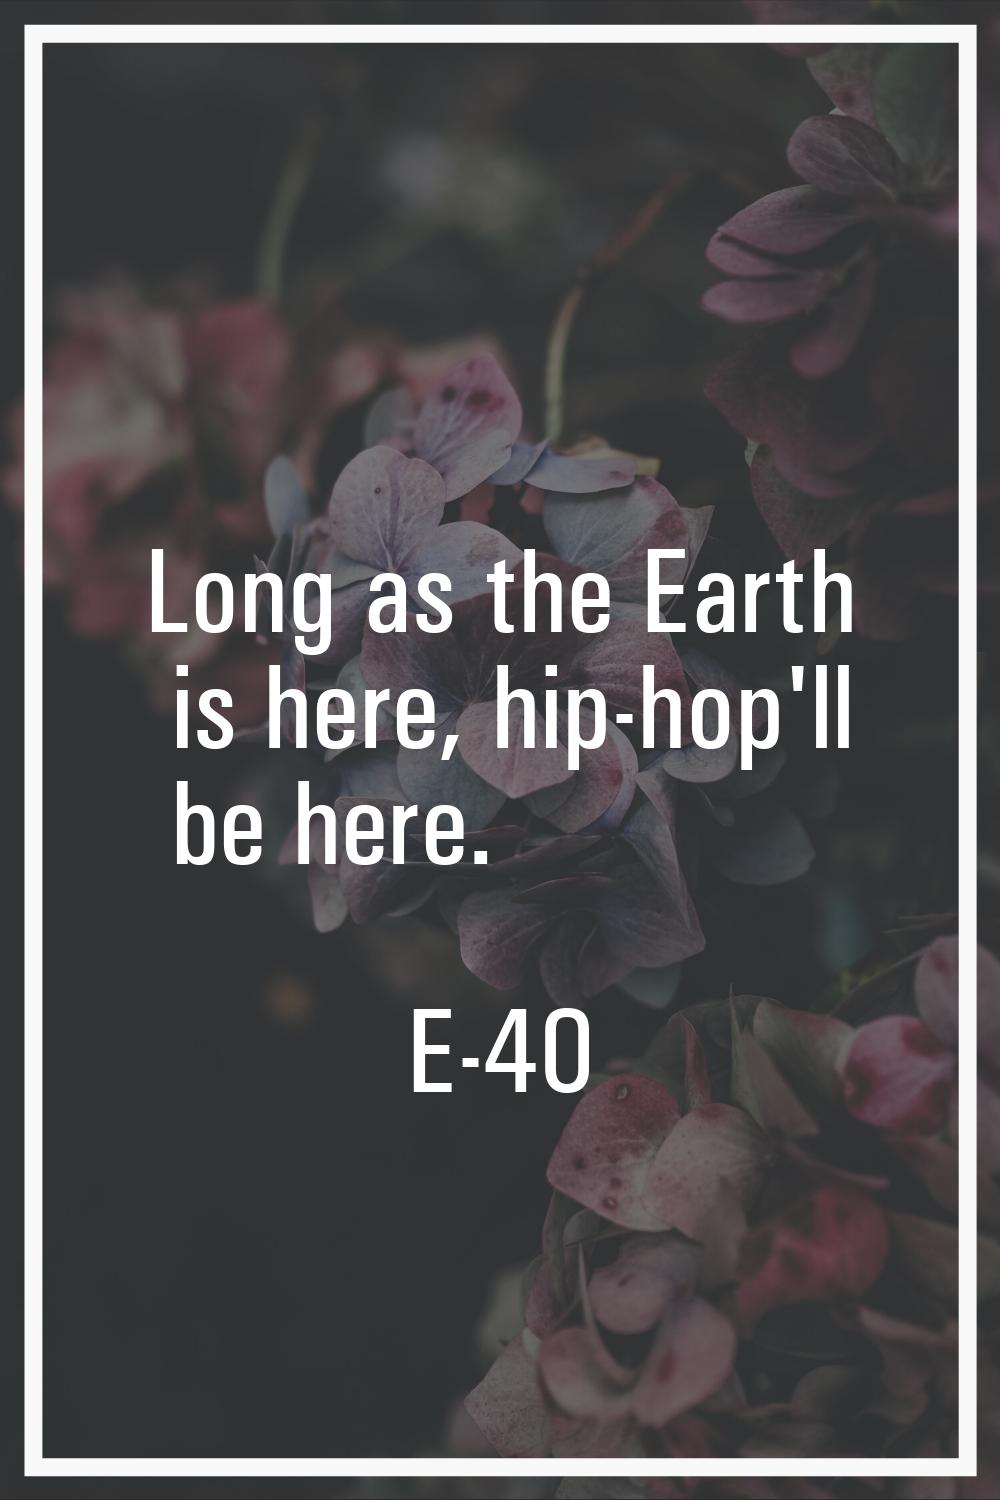 Long as the Earth is here, hip-hop'll be here.